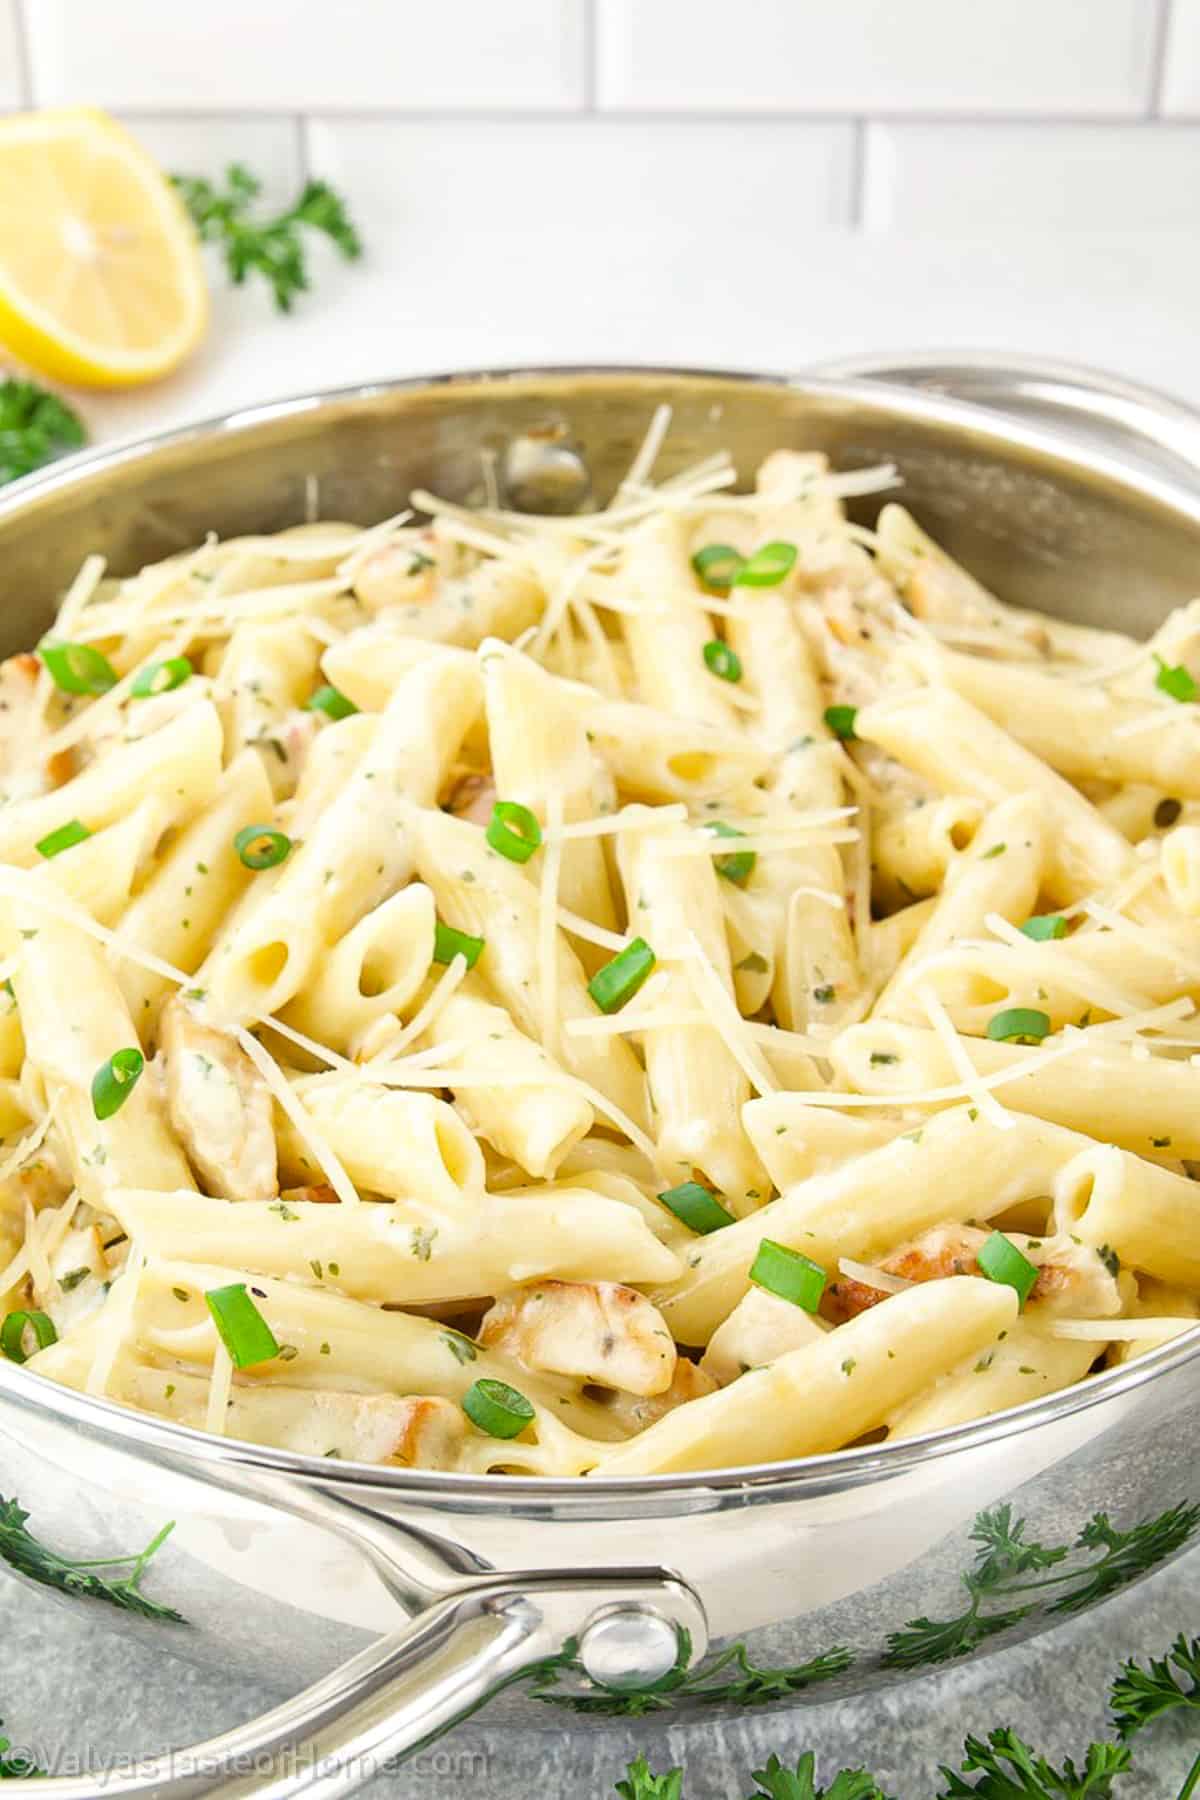 This Garlic Chicken Pasta features a delicious creamy garlic pasta sauce with chicken strips and penne pasta for an unforgettable combination!